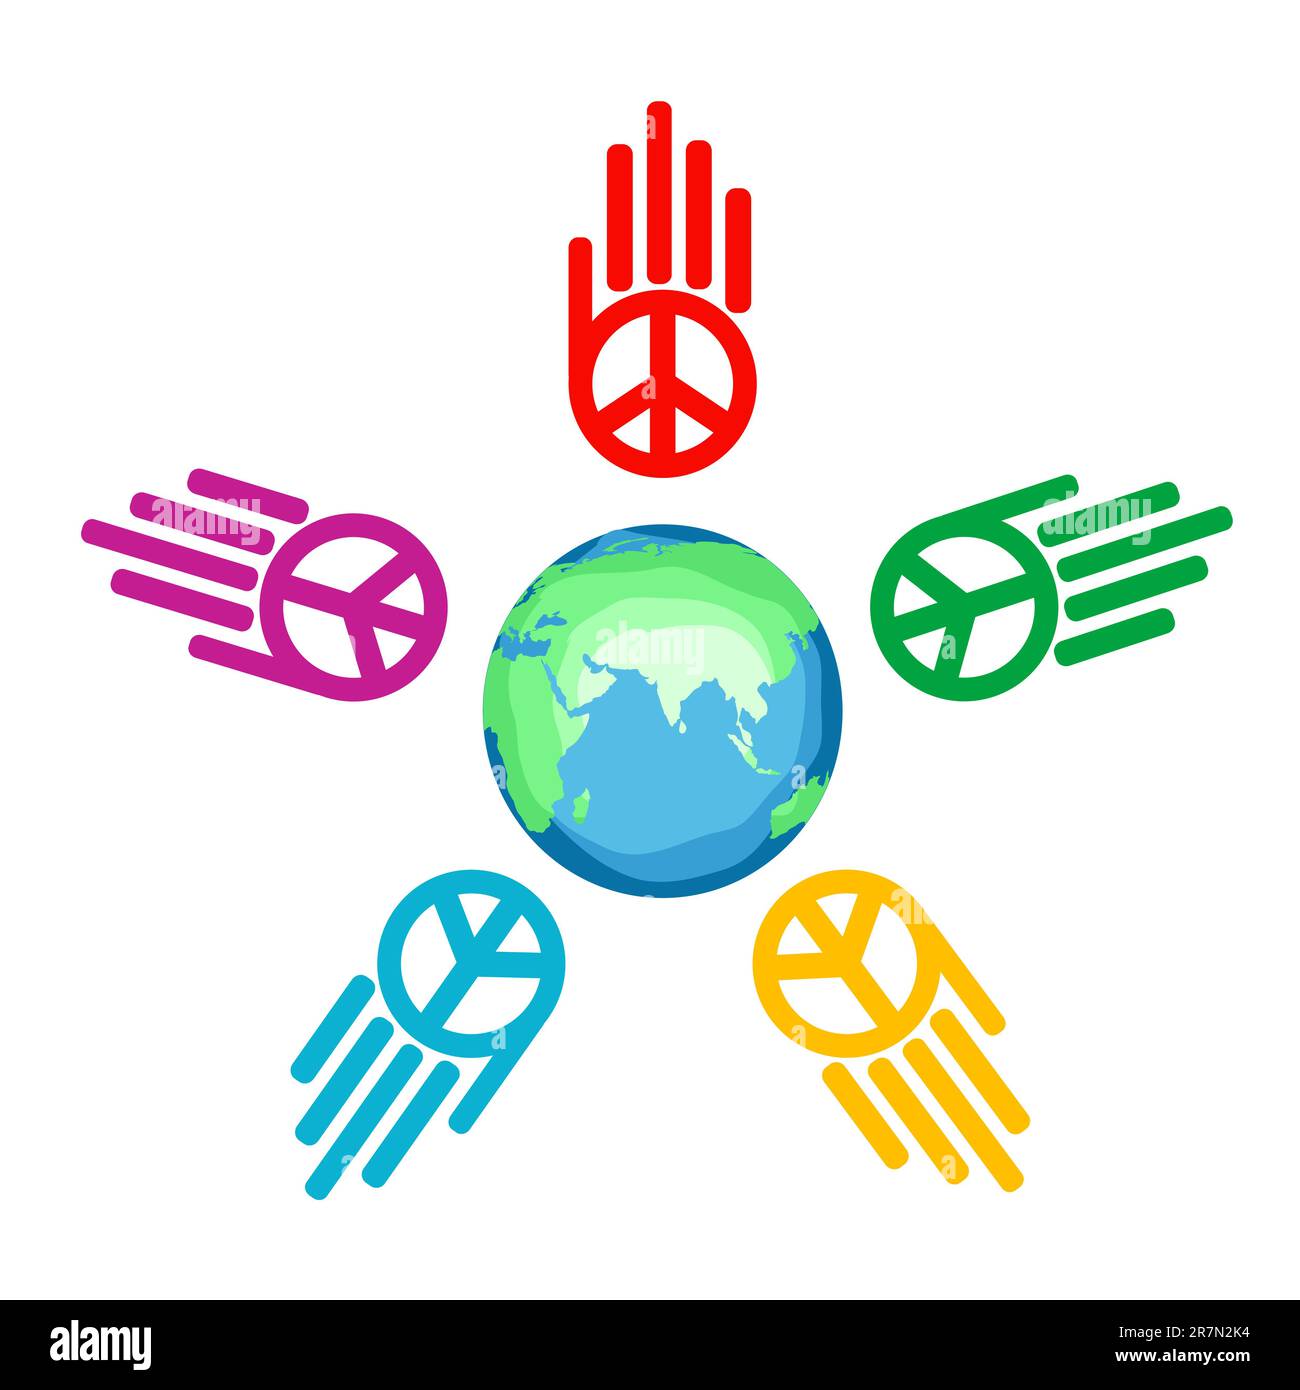 illustration of global peace on isolated background Stock Vector